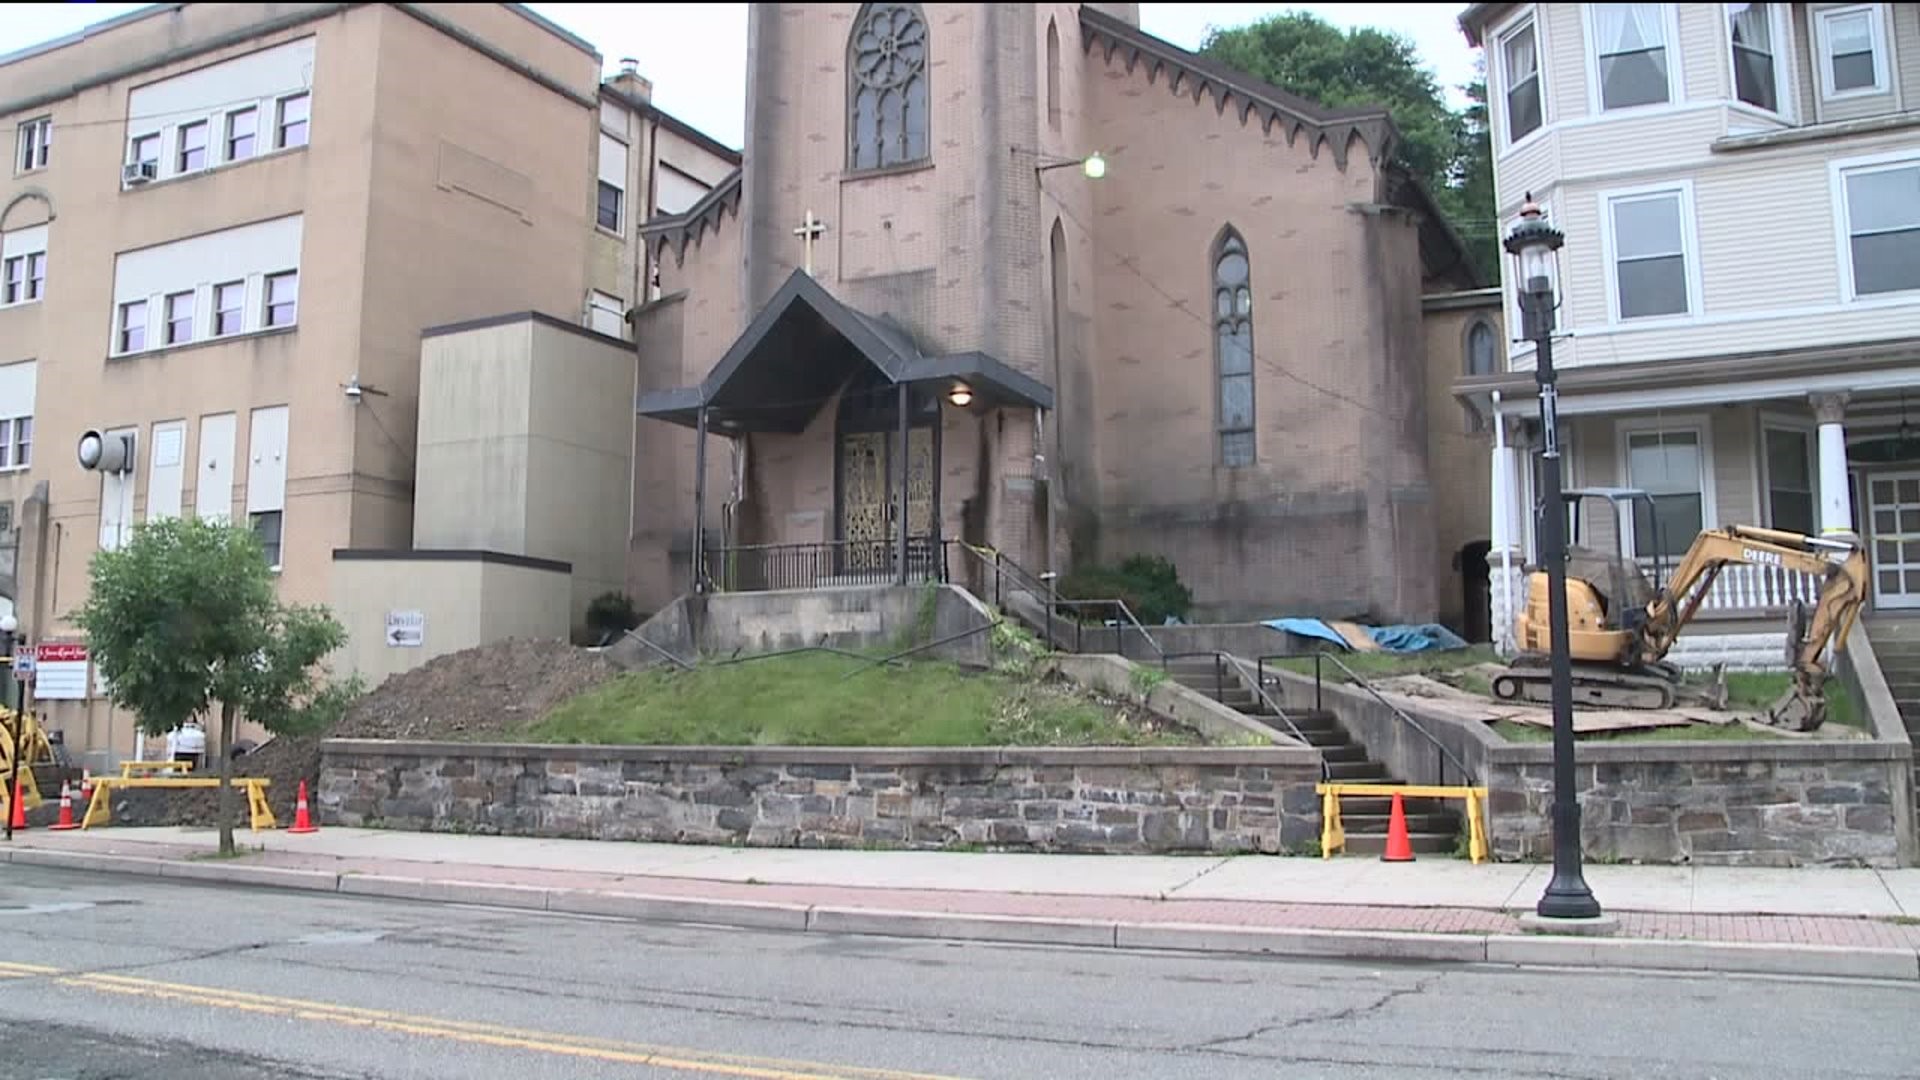 Removing Remains of Buried Priests from Former Church in Tamaqua